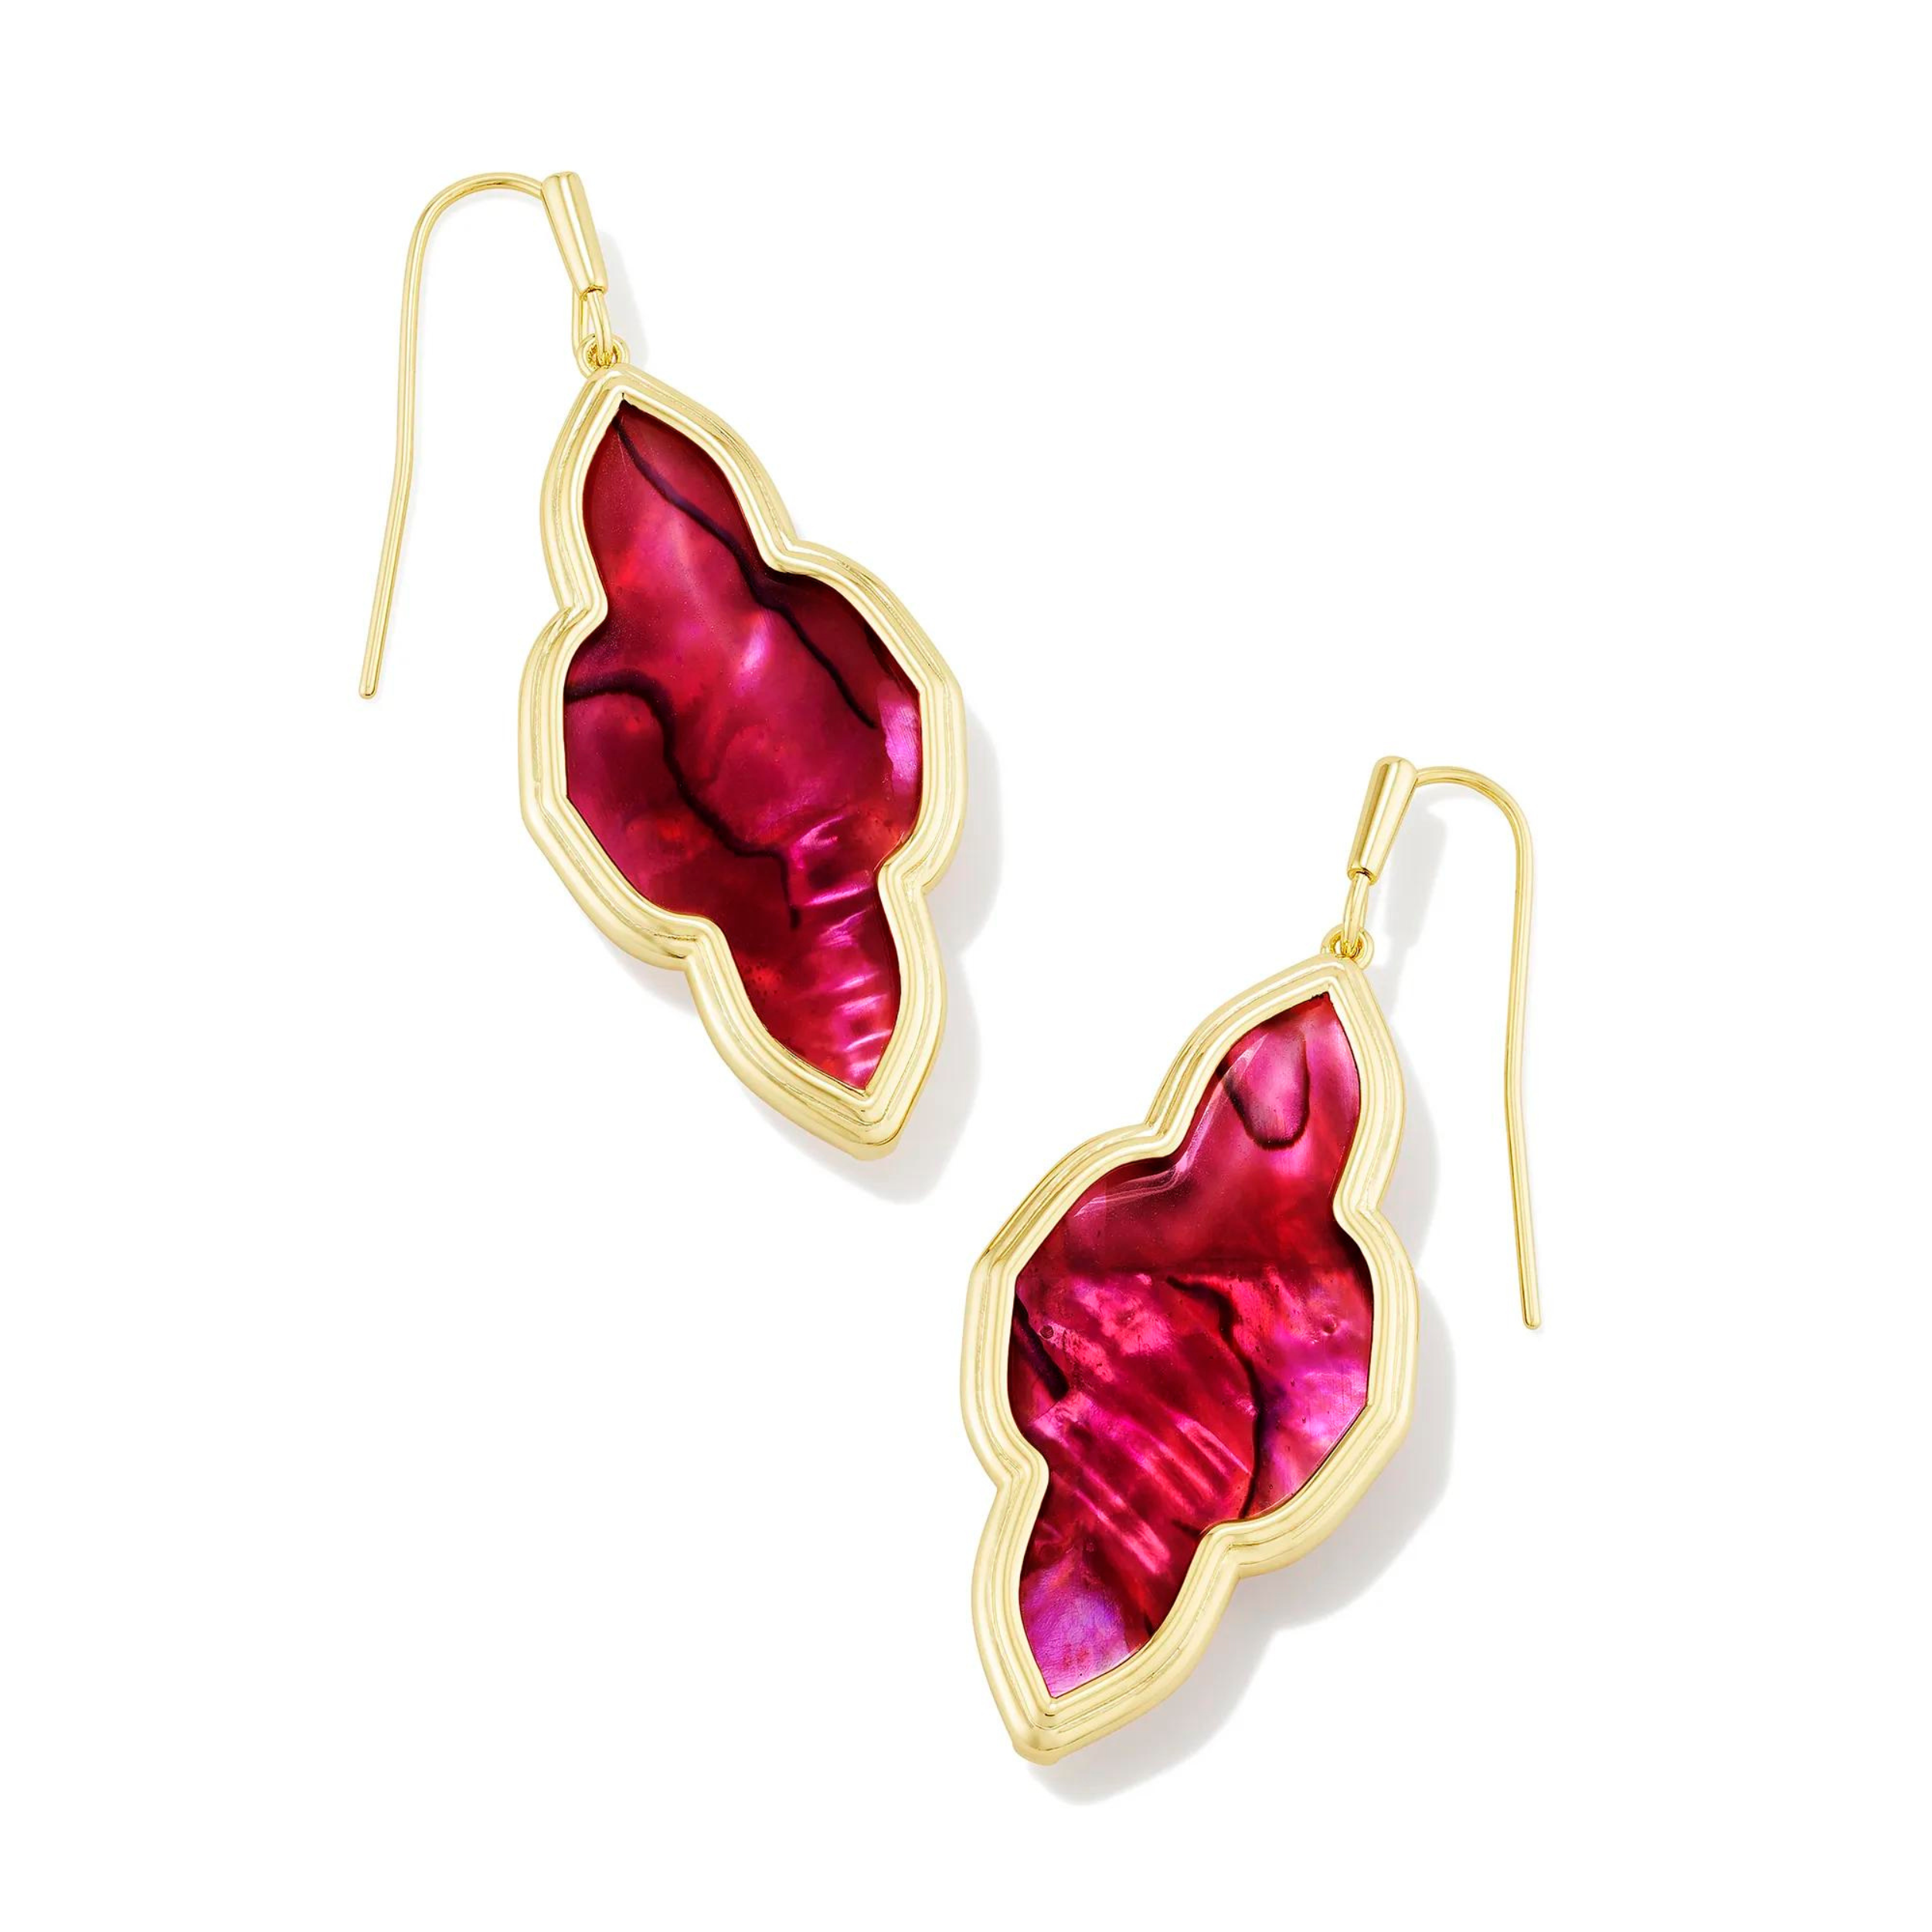 Pictured is a a pair of gold drop earrings in the abbie shape on a white background. These earrings include a gold outline with a light burgundy illusion stone.  